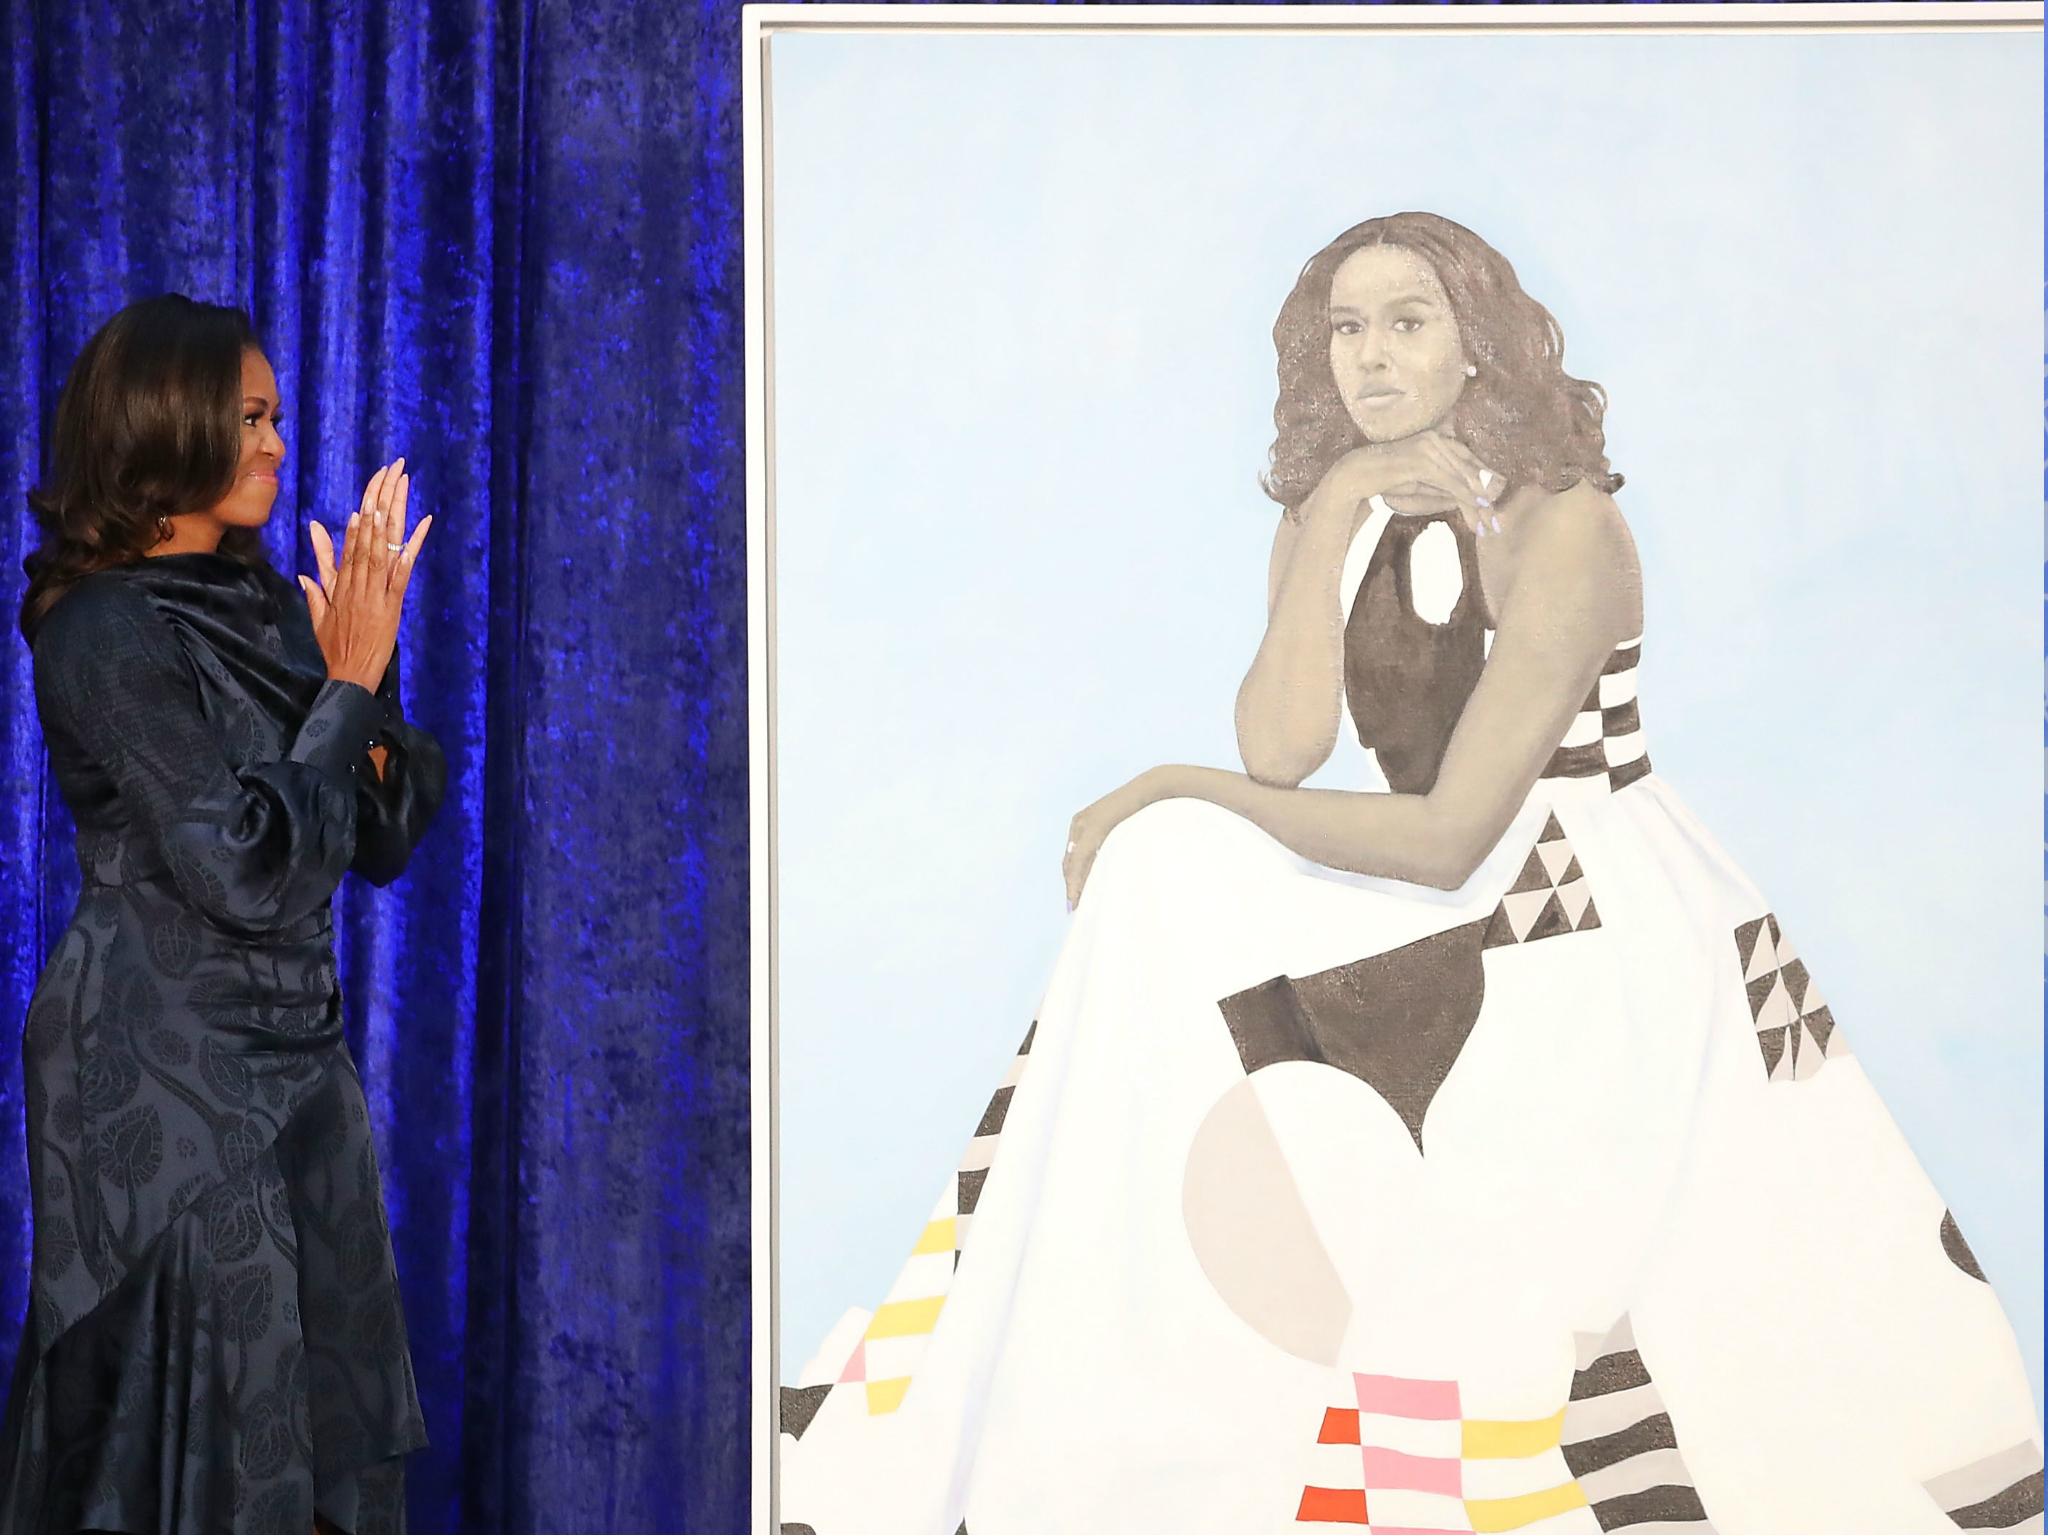 Former US First Lady Michelle Obama looks at her newly unveiled portrait during a ceremony at the Smithsonian's National Portrait Gallery, on 12 February 2018 in Washington, DC.